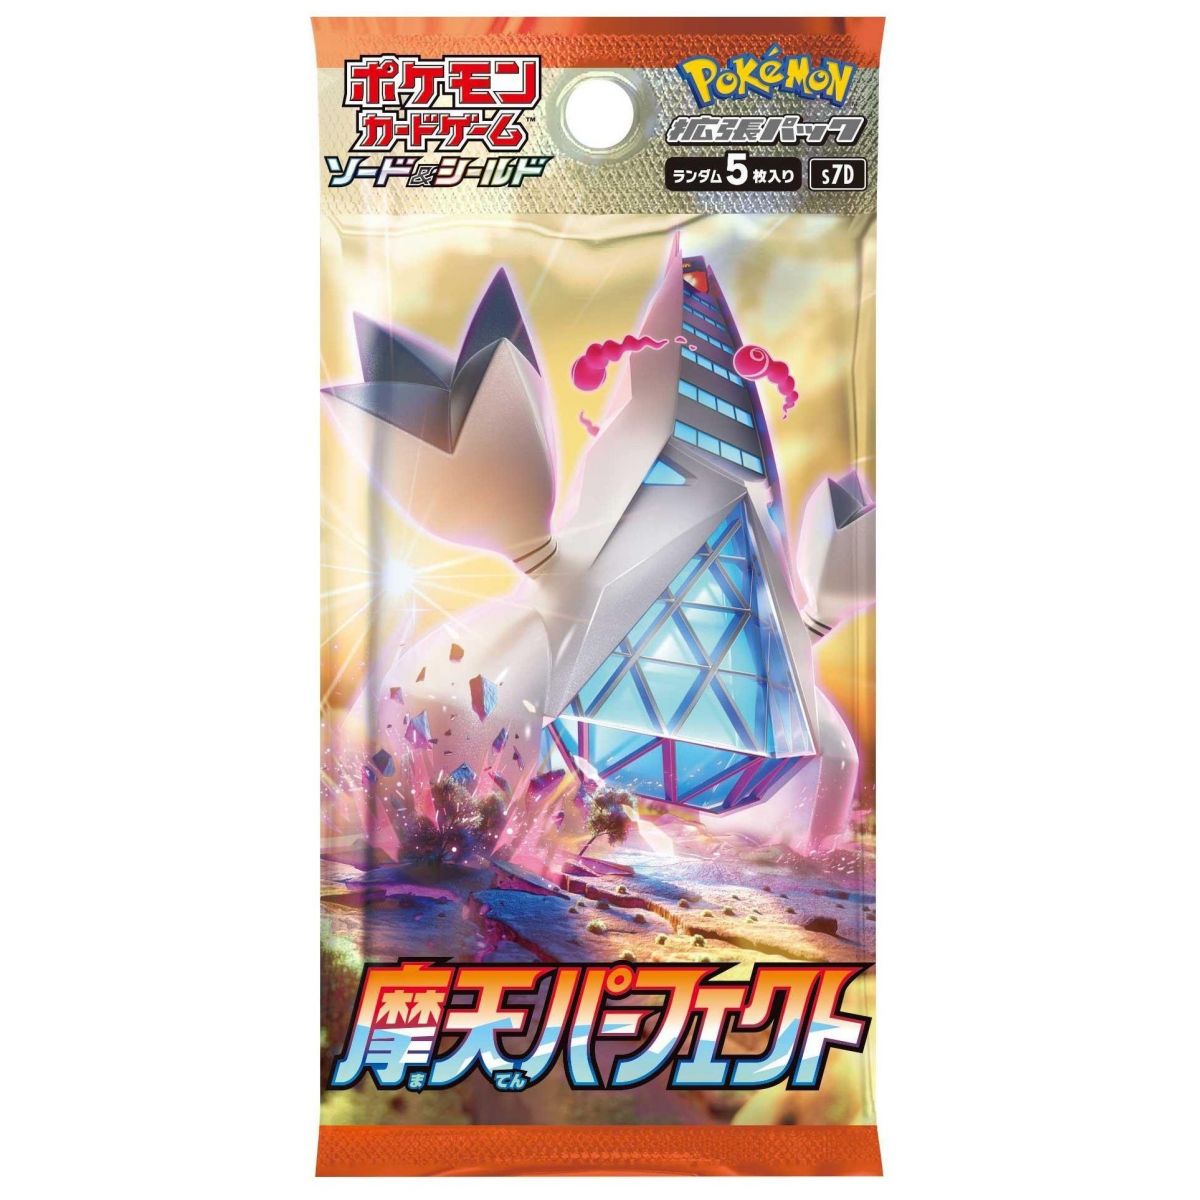 Pokémon – Booster – Towering Perfection [S7D] – JP